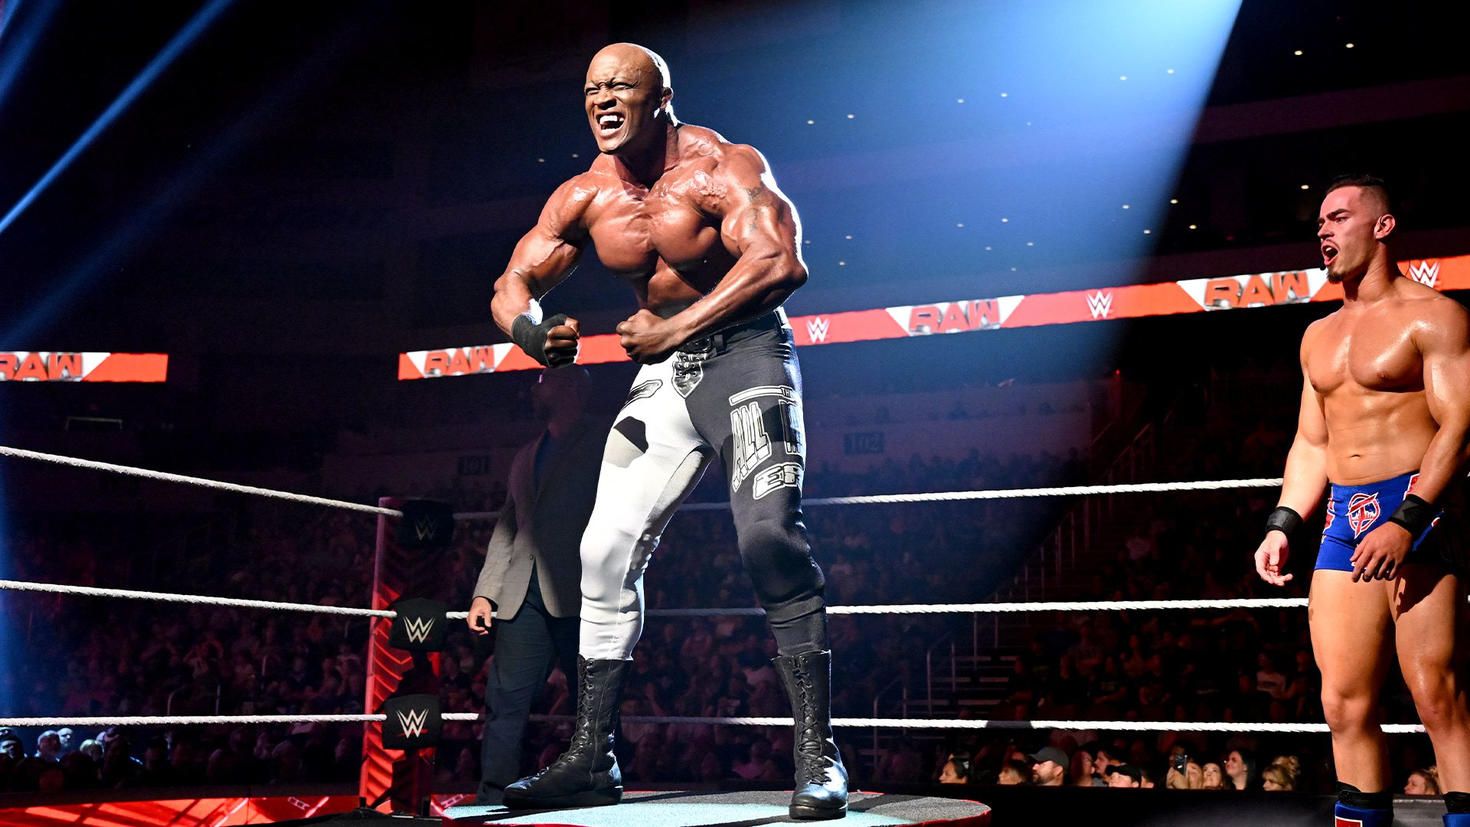 Bobby Lashley shared the ring with Theory on WWE Raw